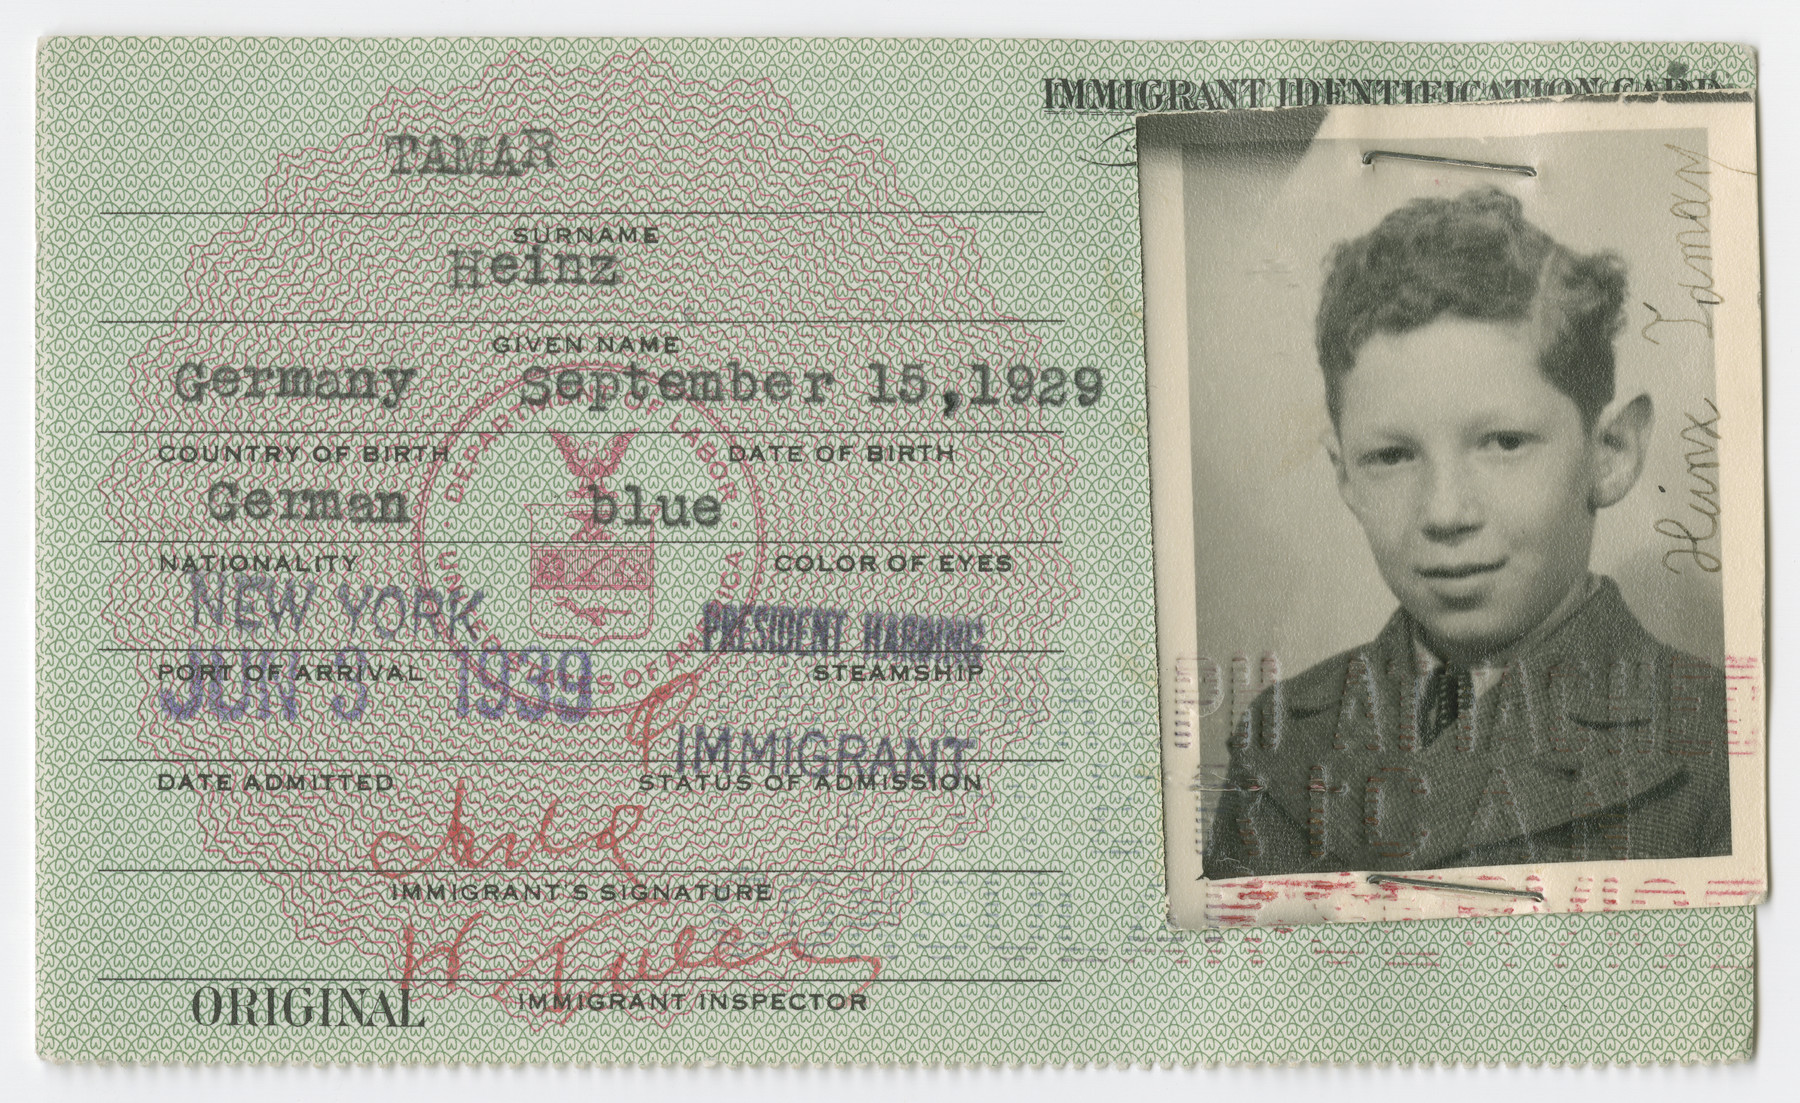 United States Immigrant Identification Card issued to Heinz Tamar.

It states he was born in Germany though he was born in Vienna.